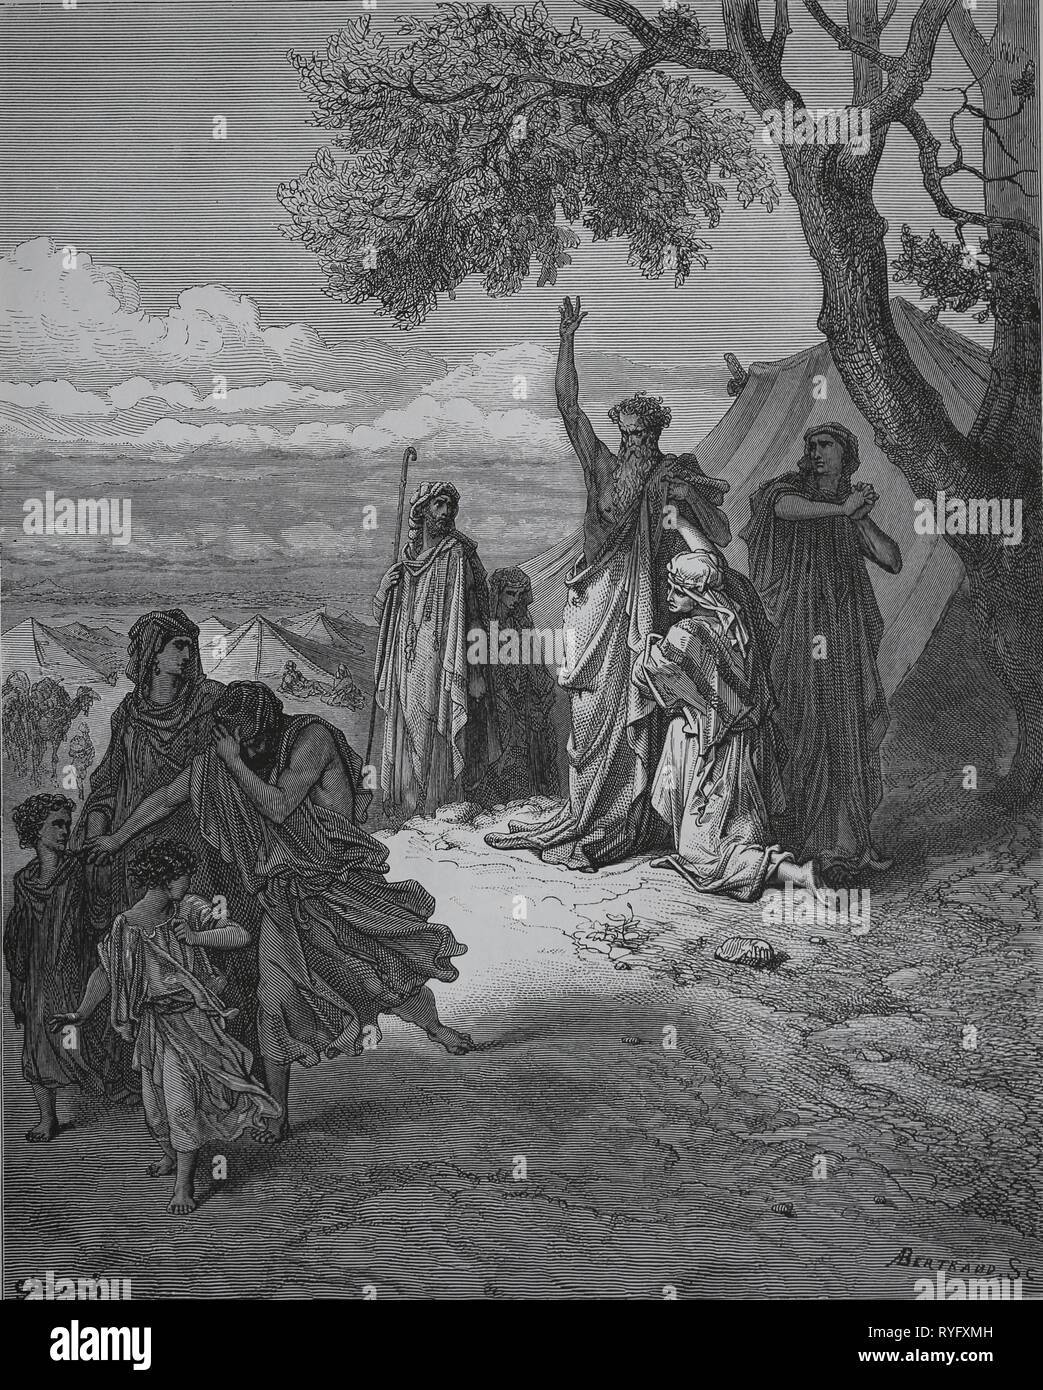 The Bible. Genesis. Noah. The Curse of Ham and Canaan. Engraving by Dore, 1866. Stock Photo